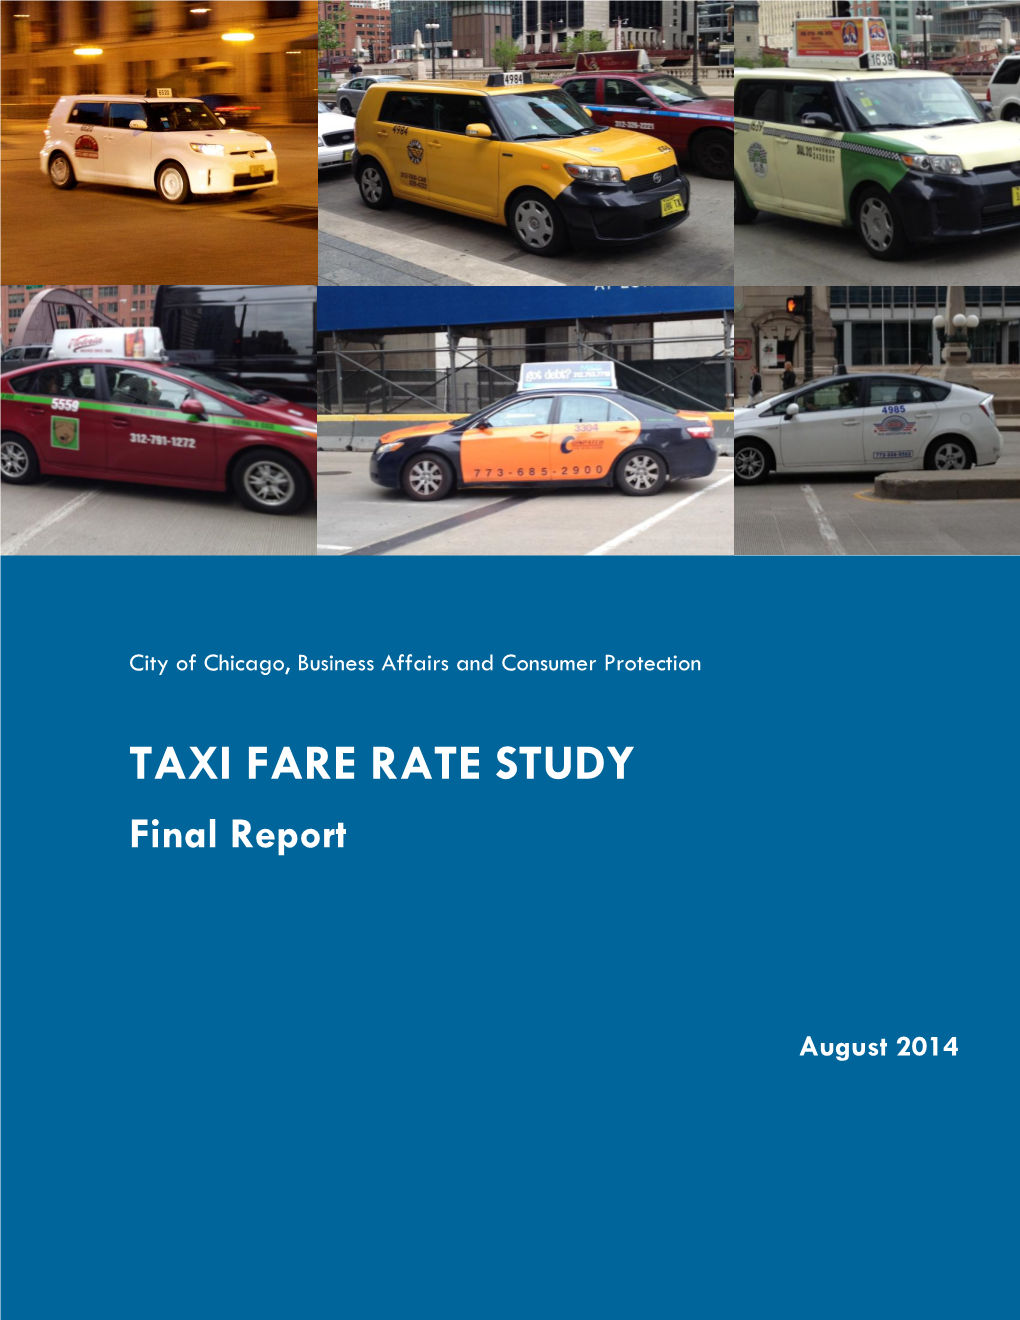 TAXI FARE RATE STUDY Final Report